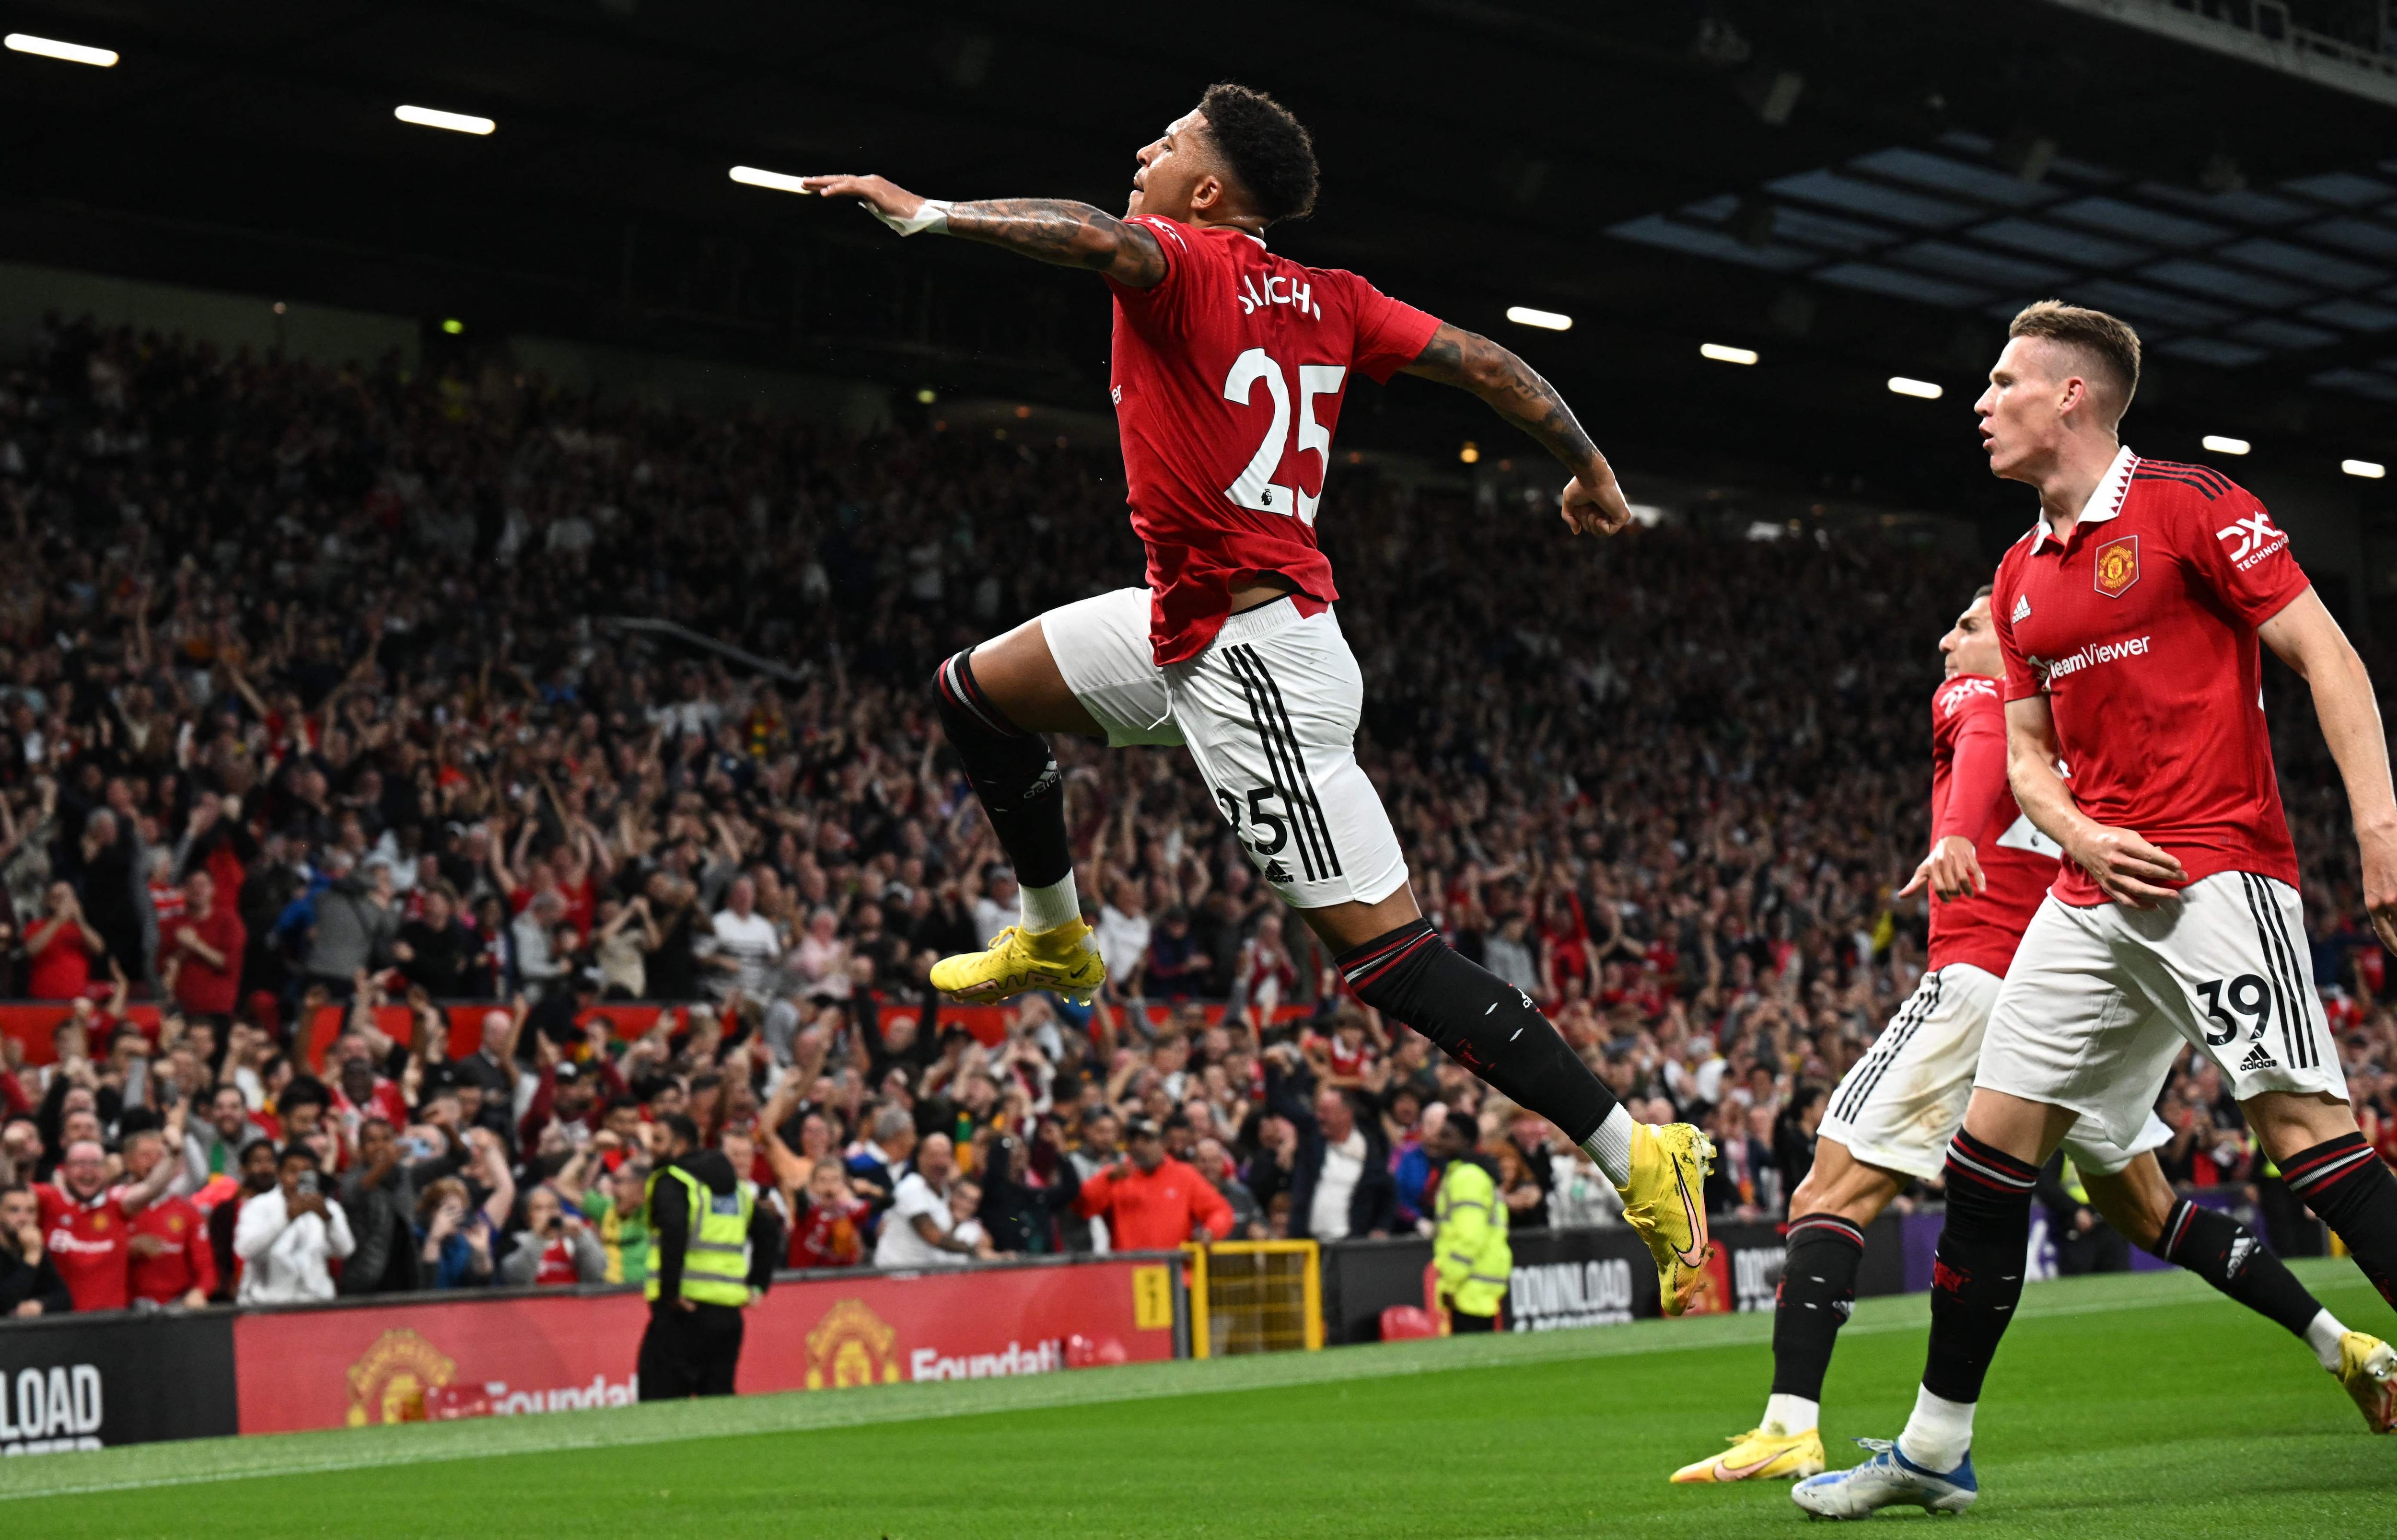 Manchester United's English striker Jadon Sancho (C) celebrates after scoring the opening goal during the English Premier League football match between Manchester United and Liverpool at Old Trafford in Manchester, north west England, on August 22, 2022. (Photo by Paul ELLIS / AFP) / RESTRICTED TO EDITORIAL USE. No use with unauthorized audio, video, data, fixture lists, club/league logos or 'live' services. Online in-match use limited to 120 images. An additional 40 images may be used in extra time. No video emulation. Social media in-match use limited to 120 images. An additional 40 images may be used in extra time. No use in betting publications, games or single club/league/player publications. / 